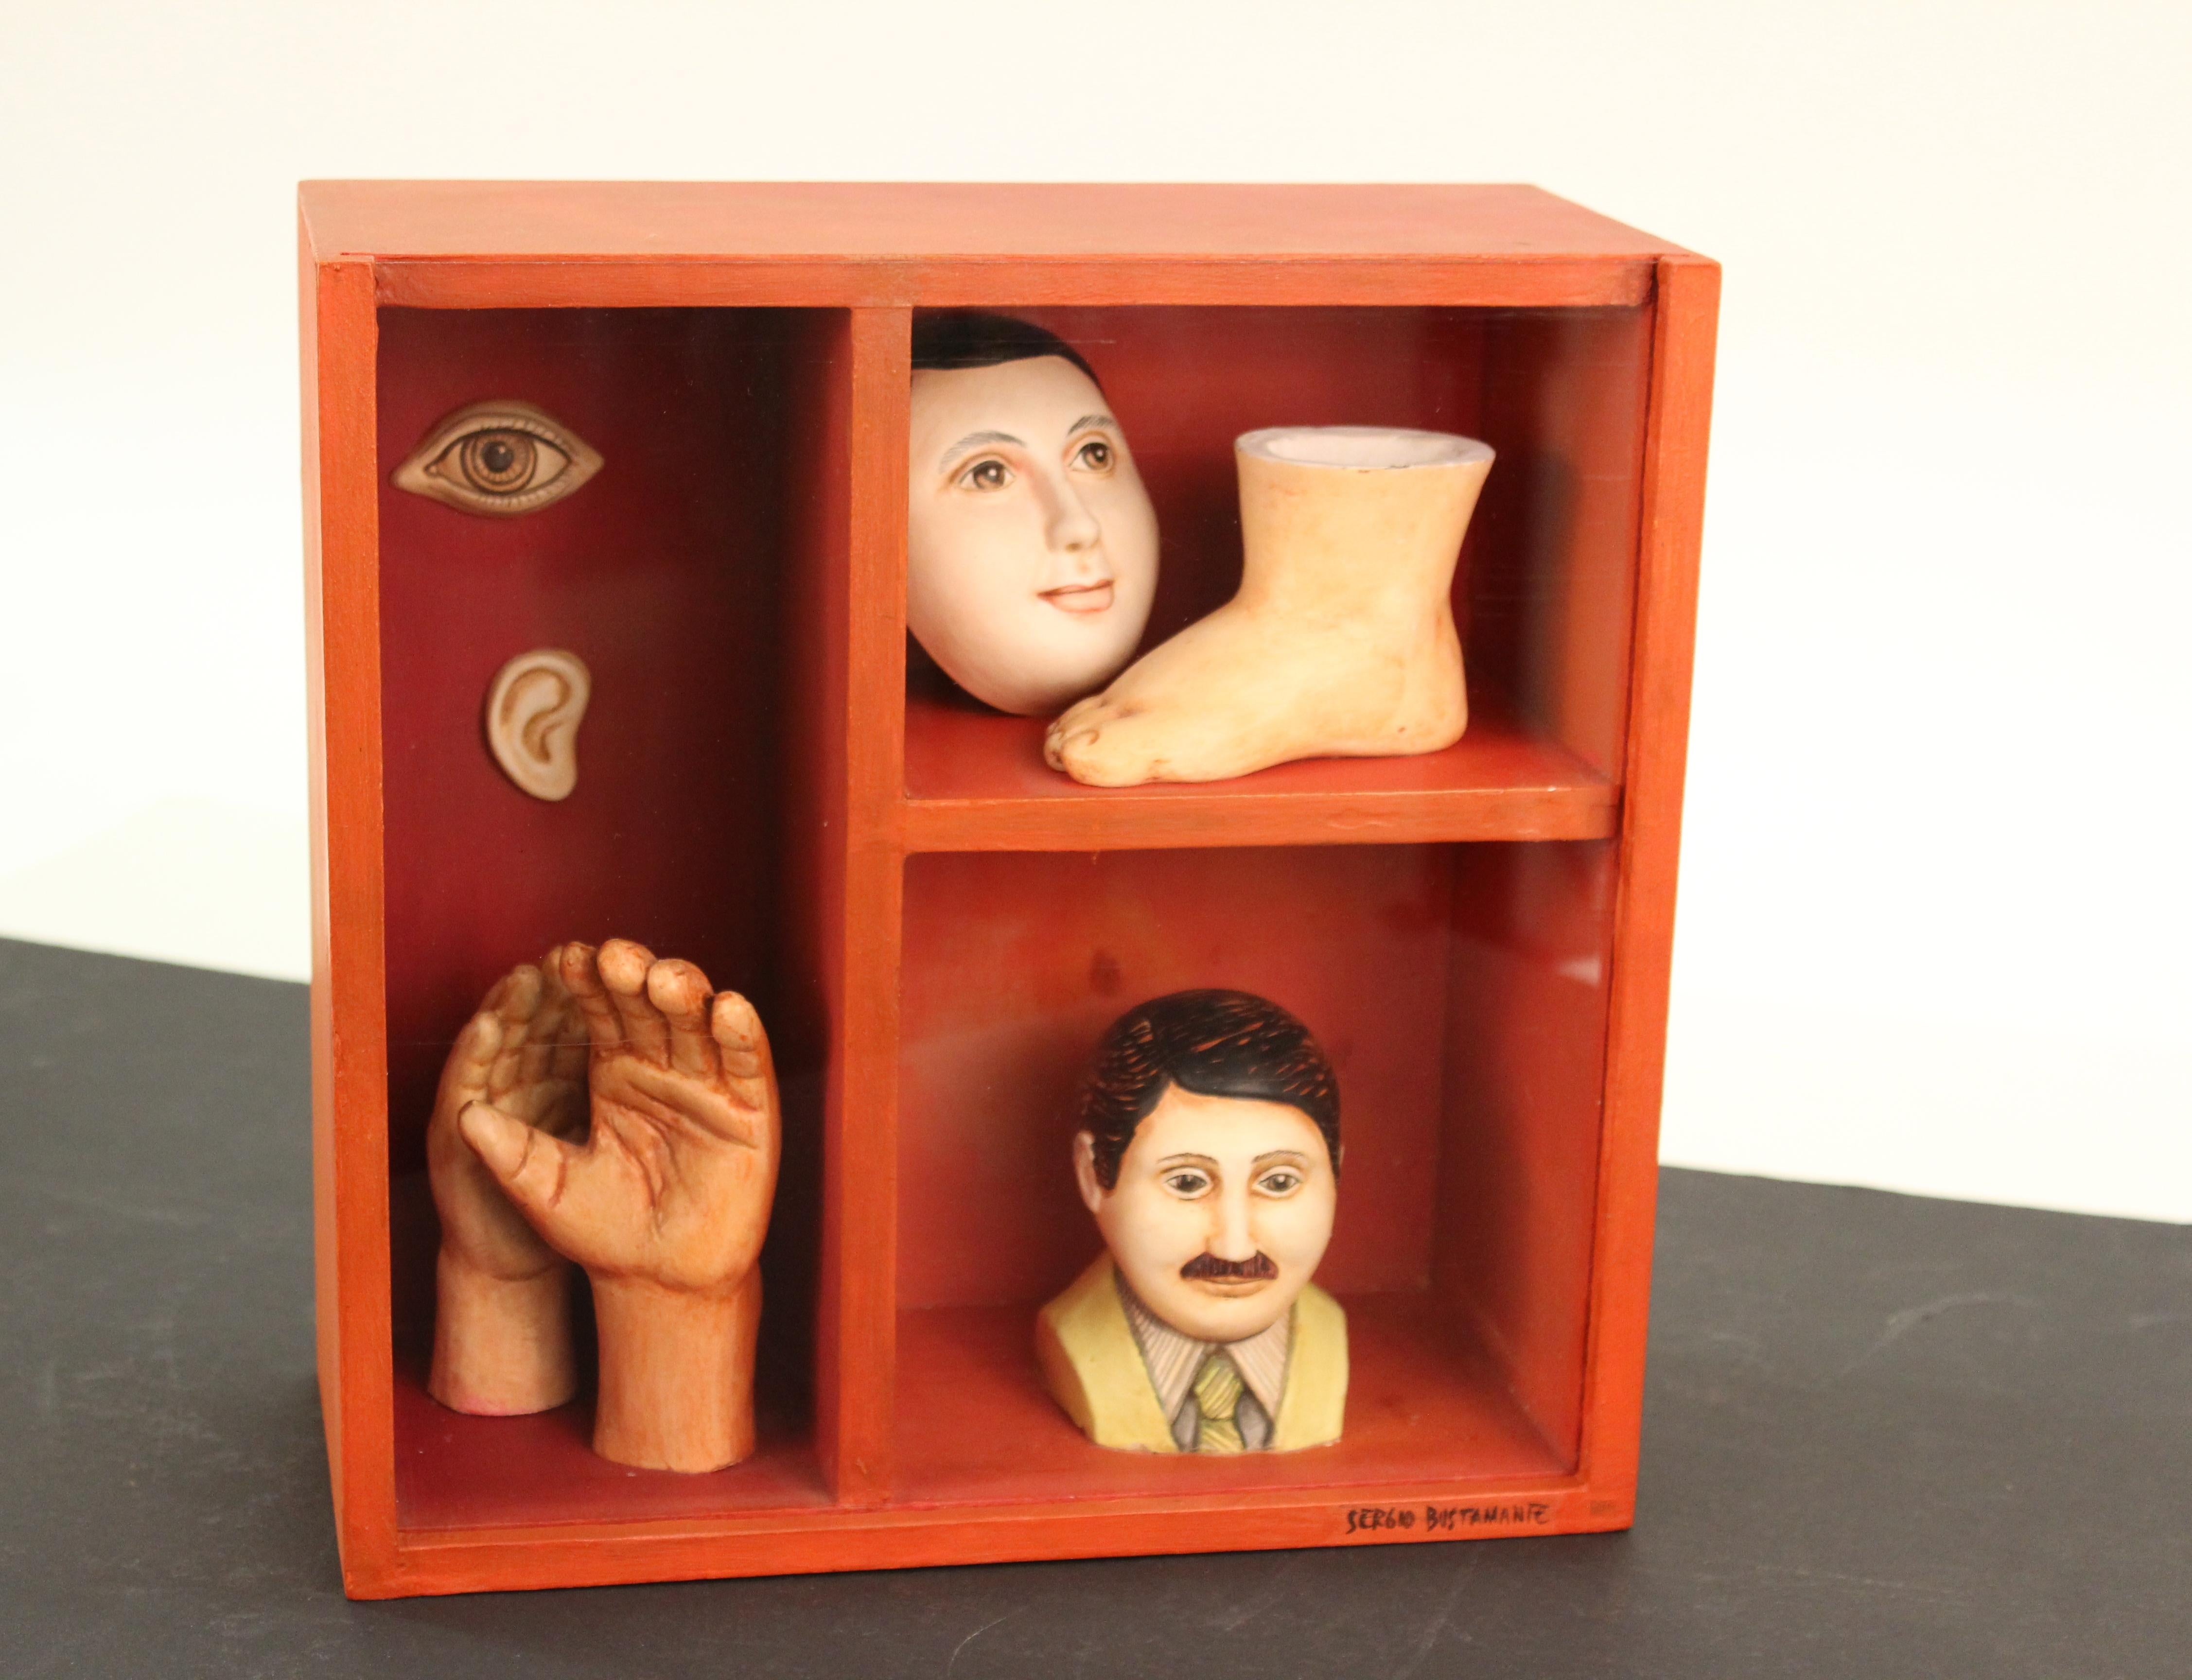 Sergio Bustamante (Mexican, Born 1942) surrealist-style sculpture of a shadow box in red wood with several cubby spaces. Each space contains a part of the human body including a foot, a pair of hands, and eye, an ear and two human busts; one of